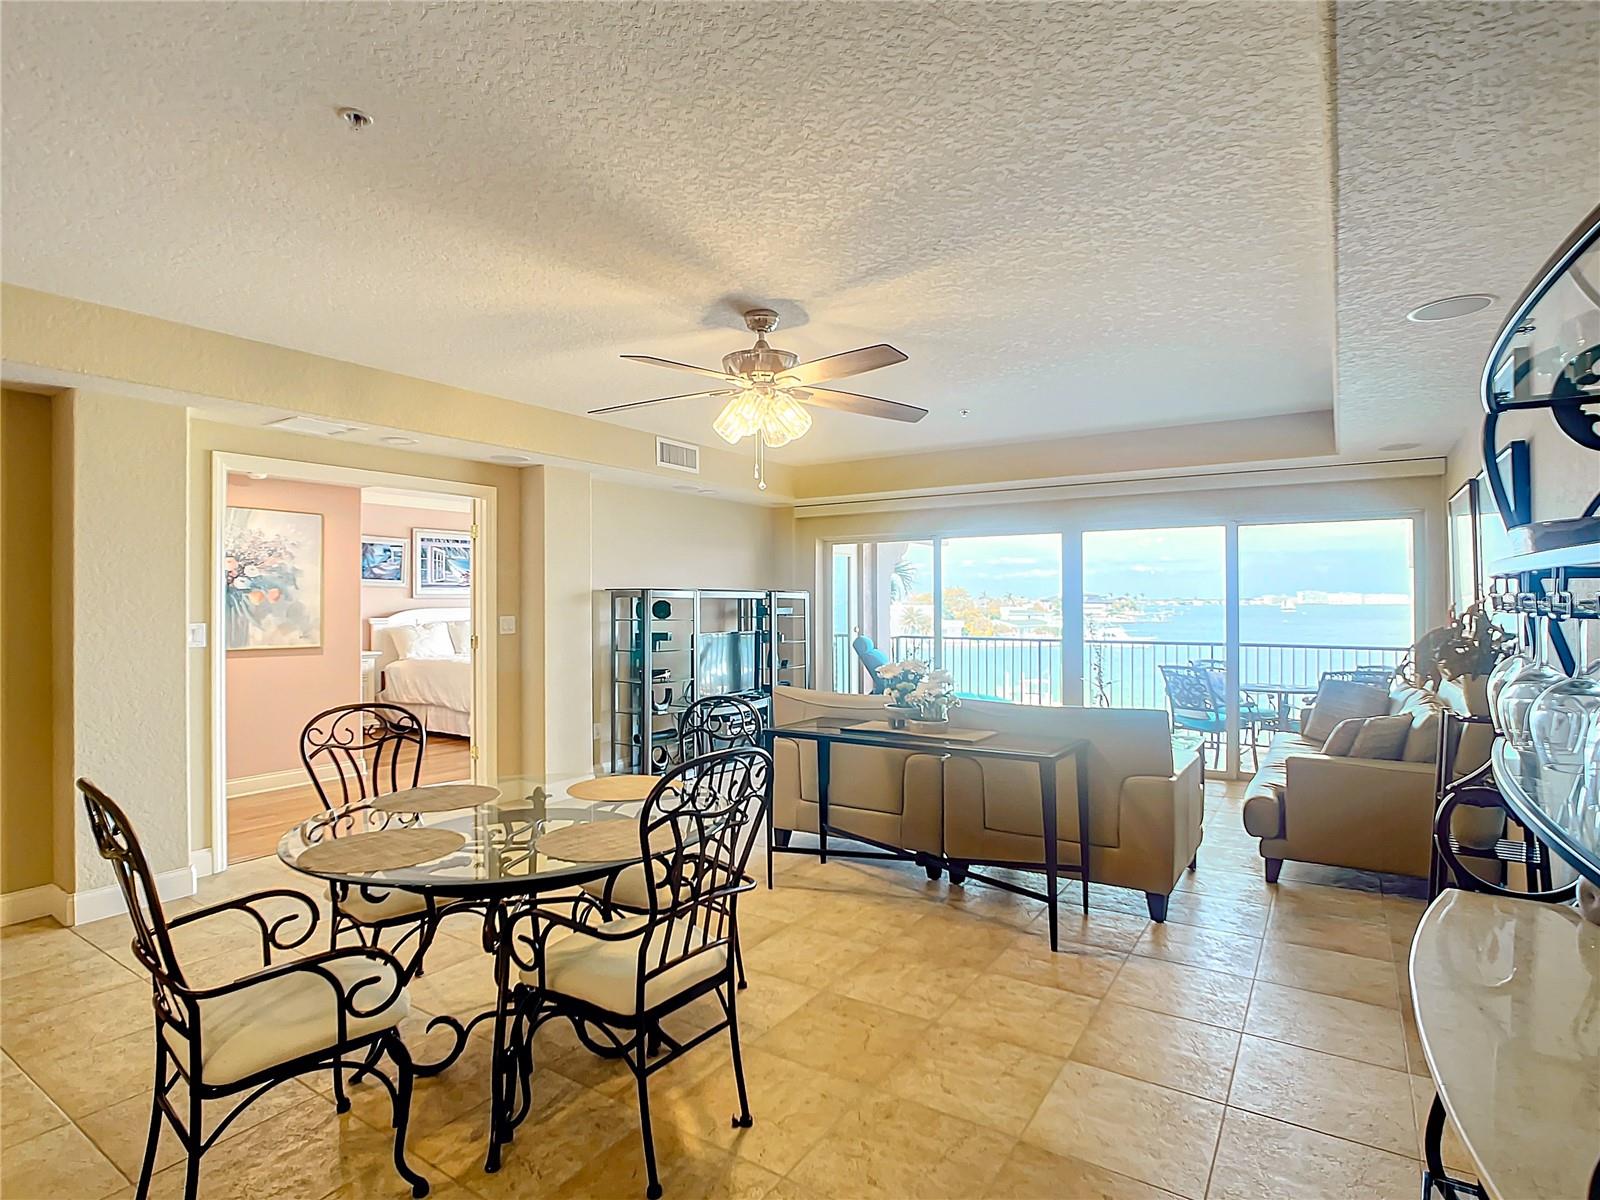 This living space can be set up any way you would like.  You can enjoy the water views from all areas.